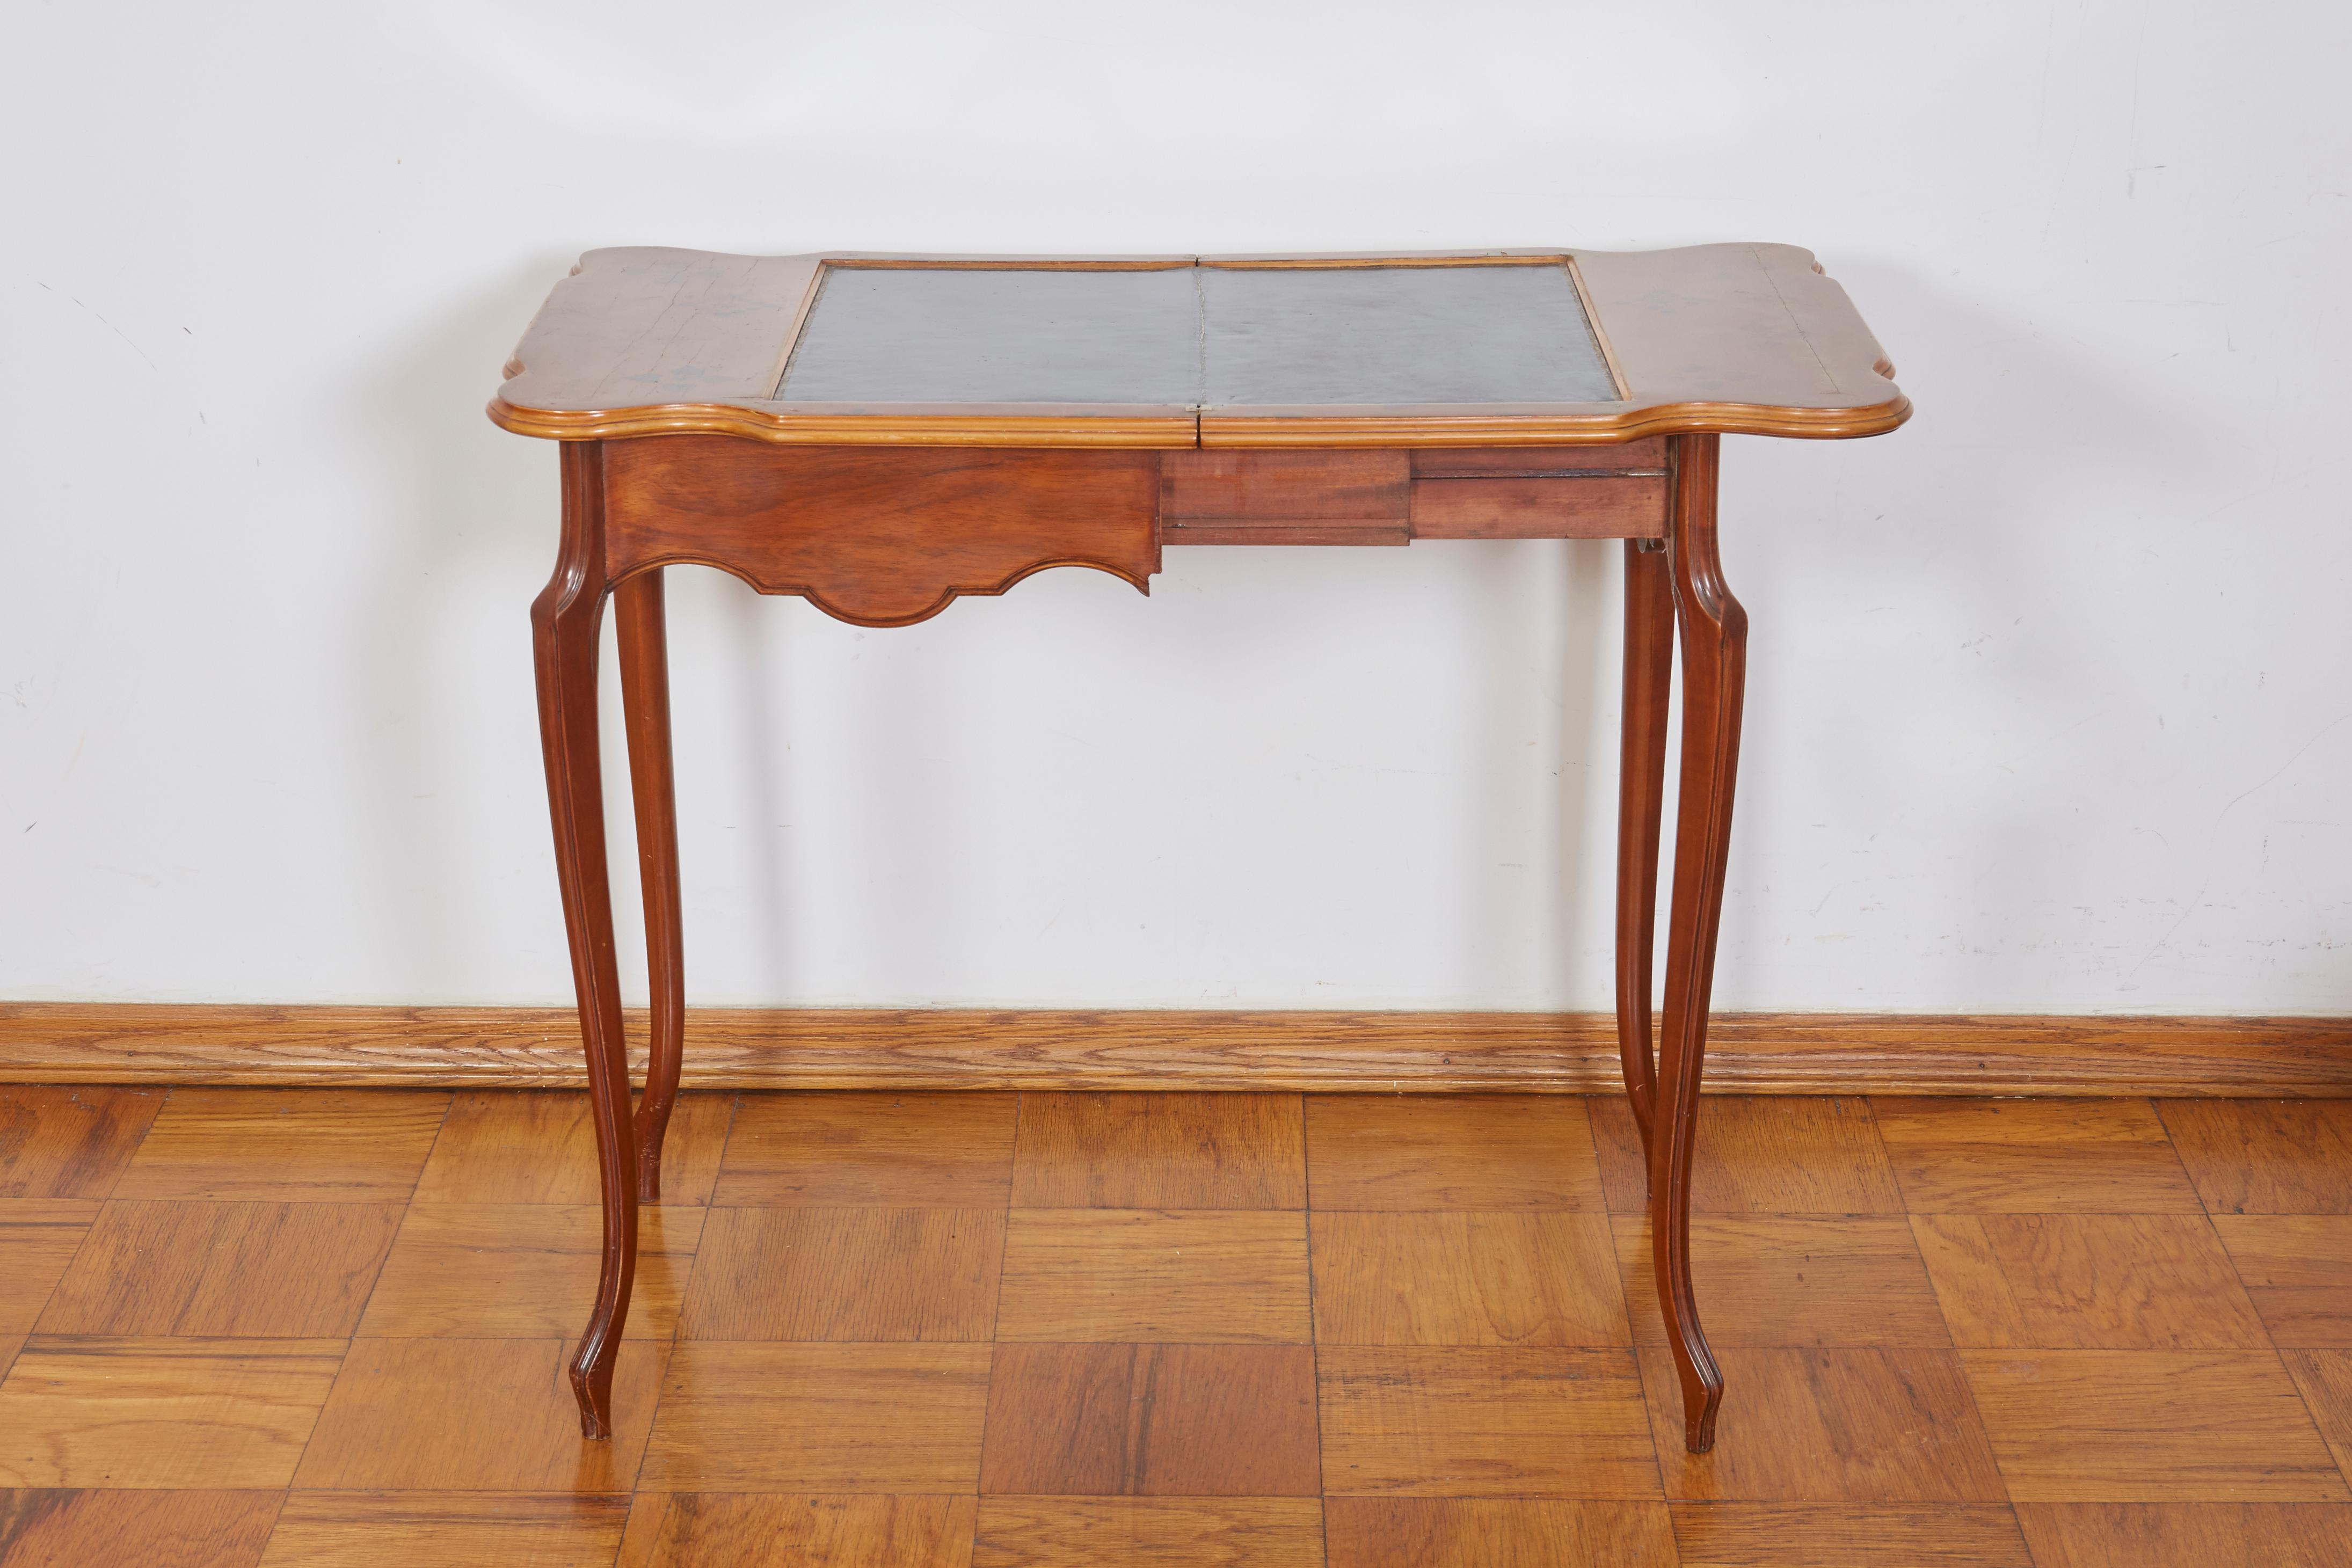 20th Century French Art Nouveau Game Table by Emile Galle For Sale